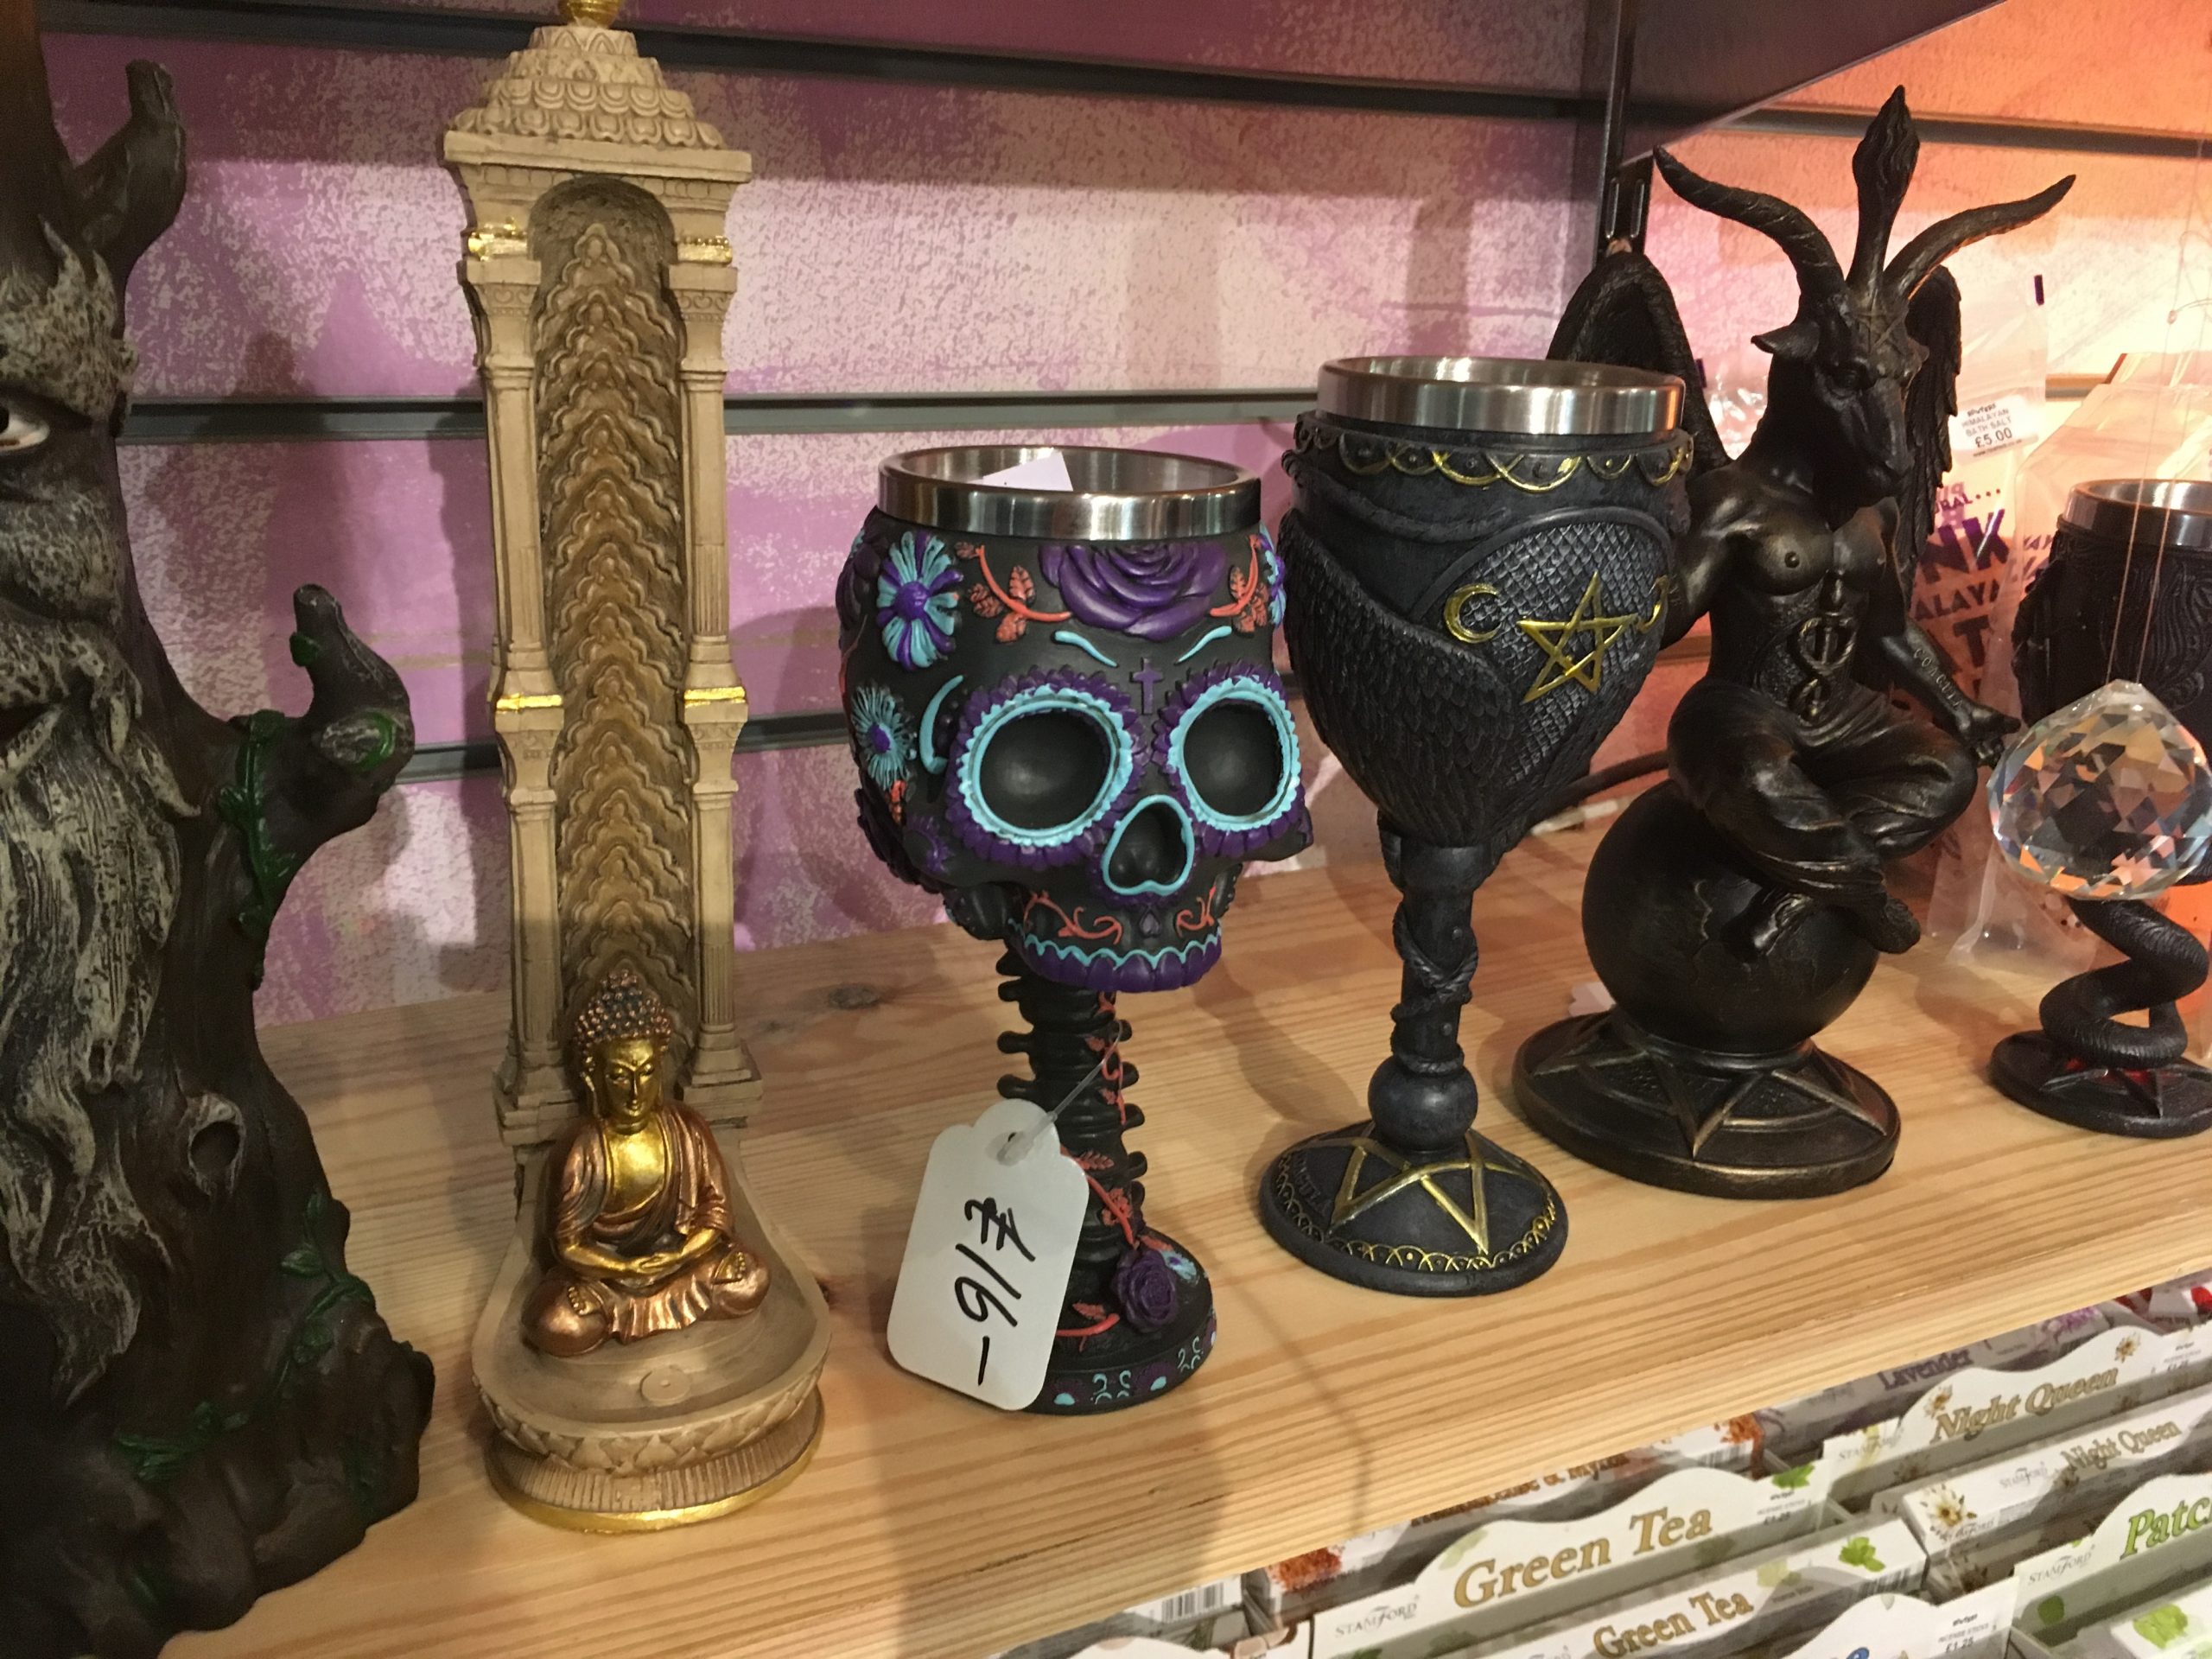 Skull patterned goblet for £16 on a shelf with an assortment of spooky drinks receptacles